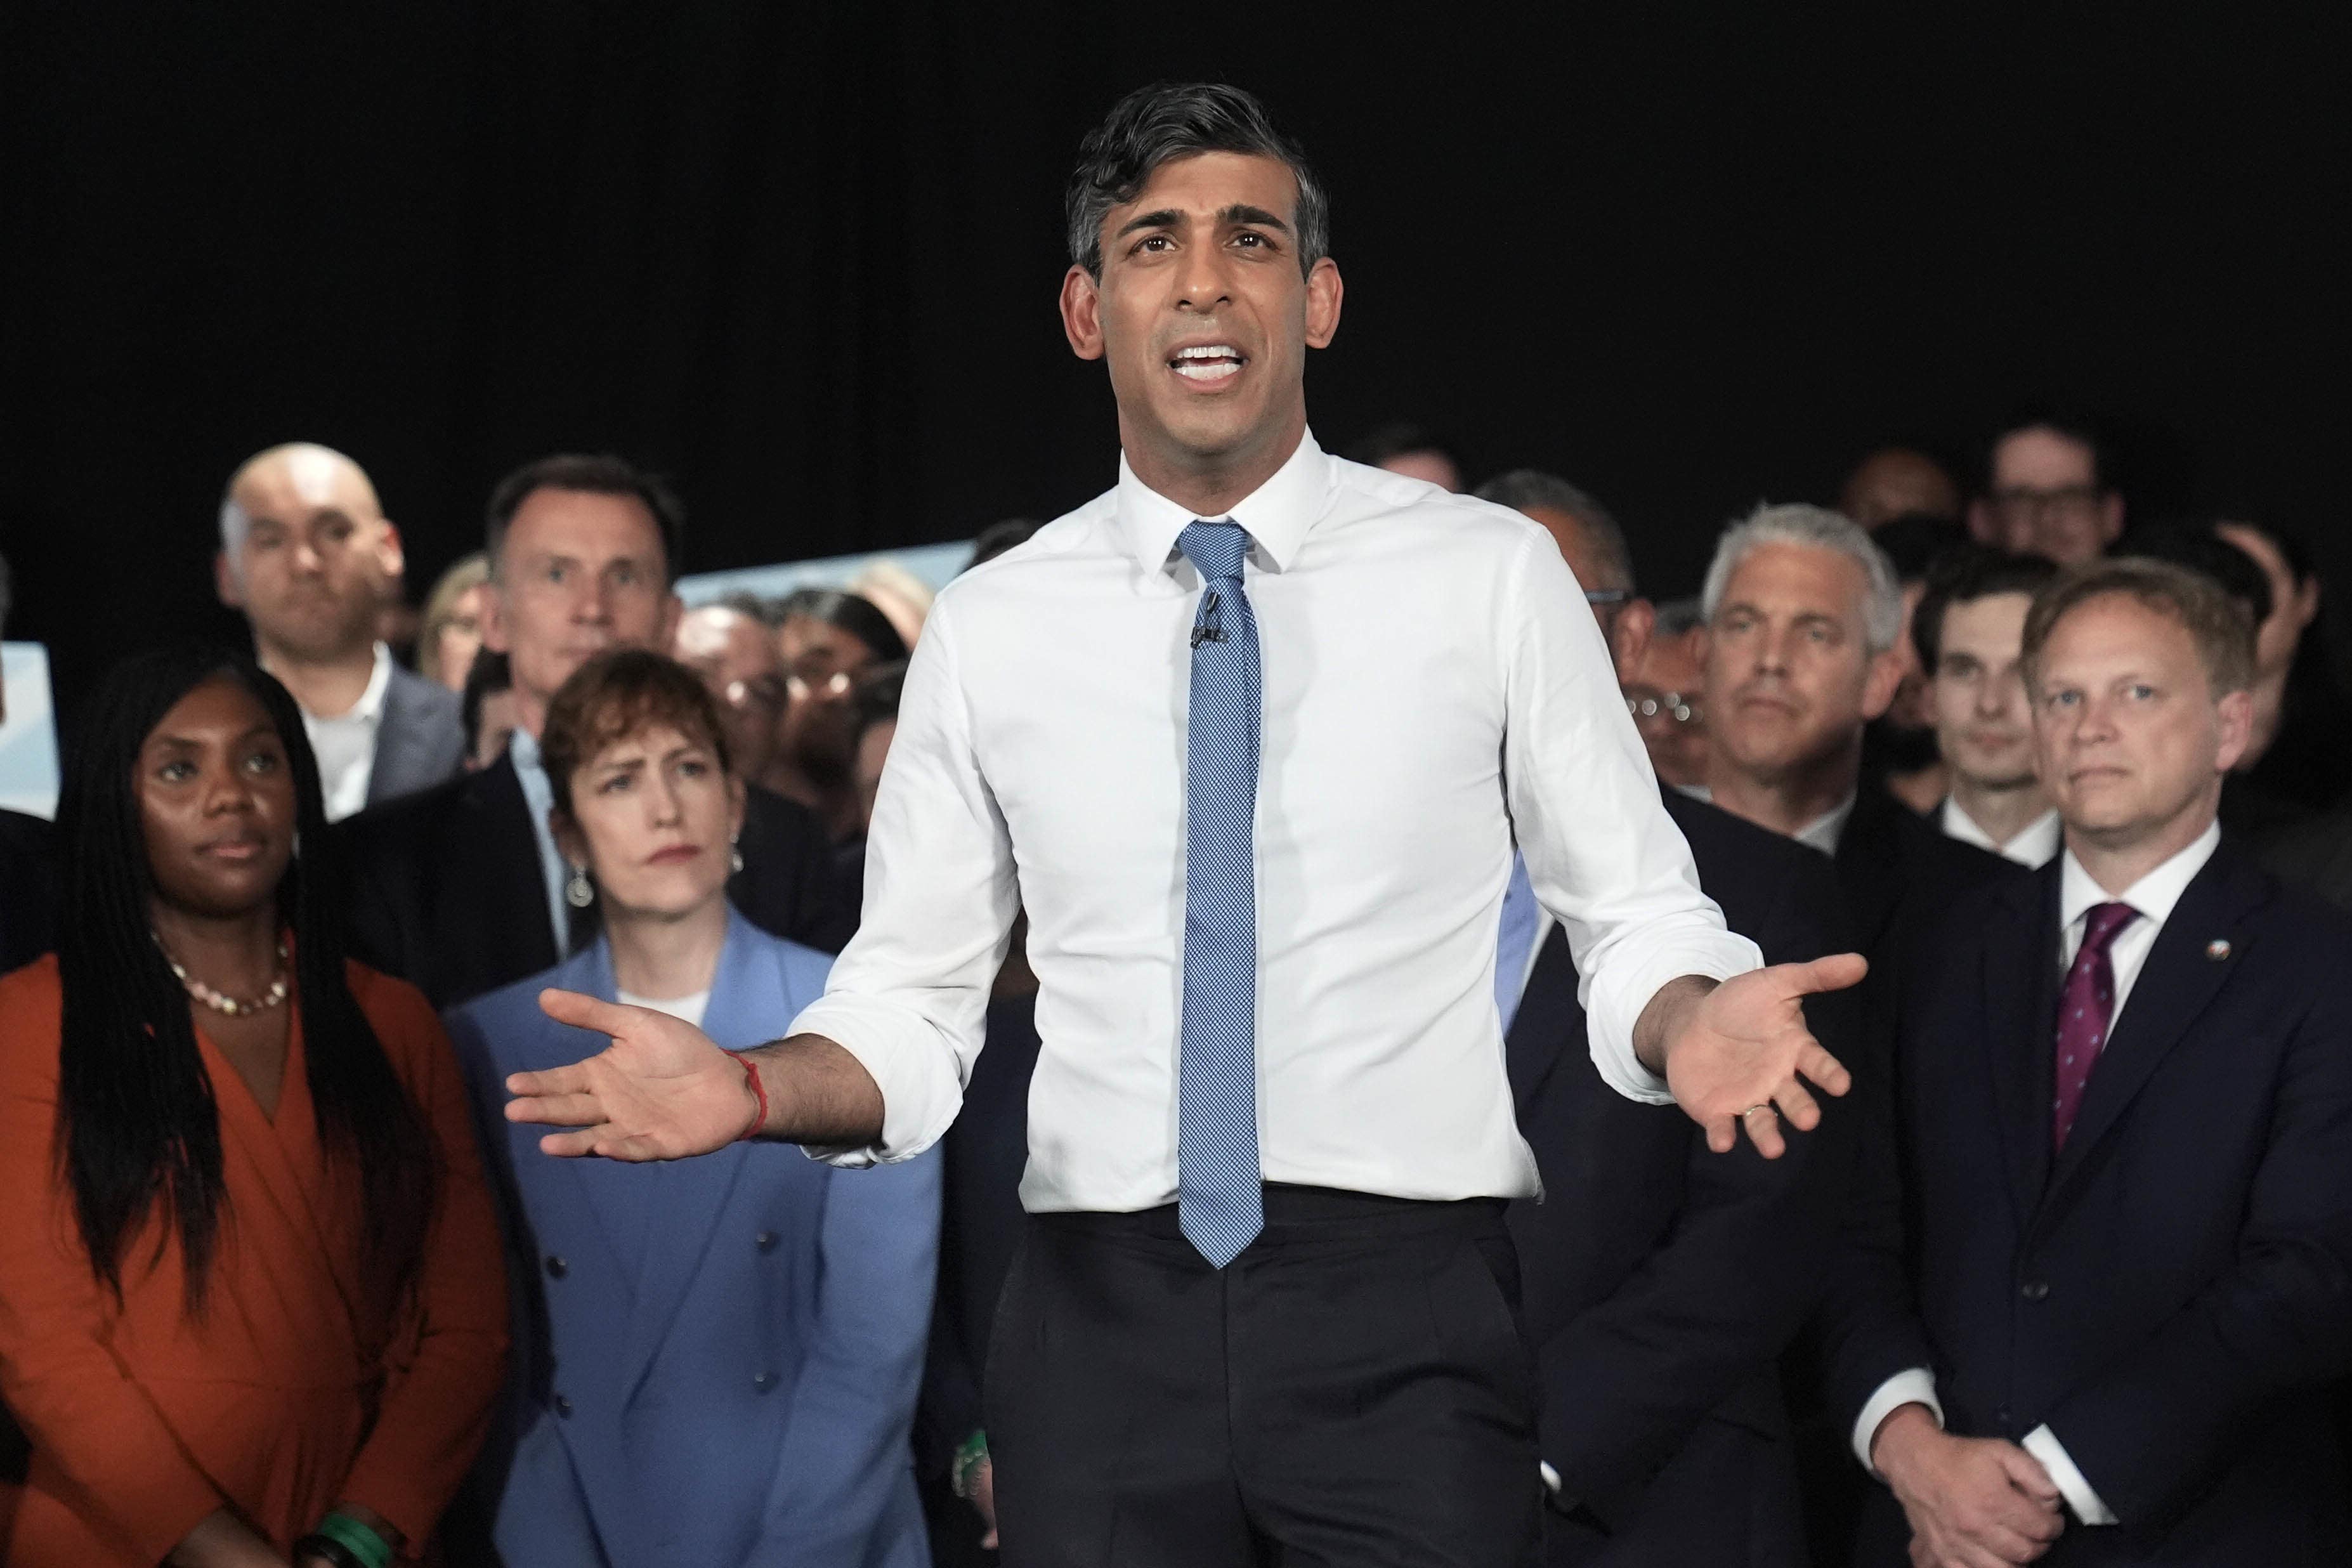 rishi sunak, office for national statistics, election headache for rishi sunak as uk population grows by 685,000 in past year